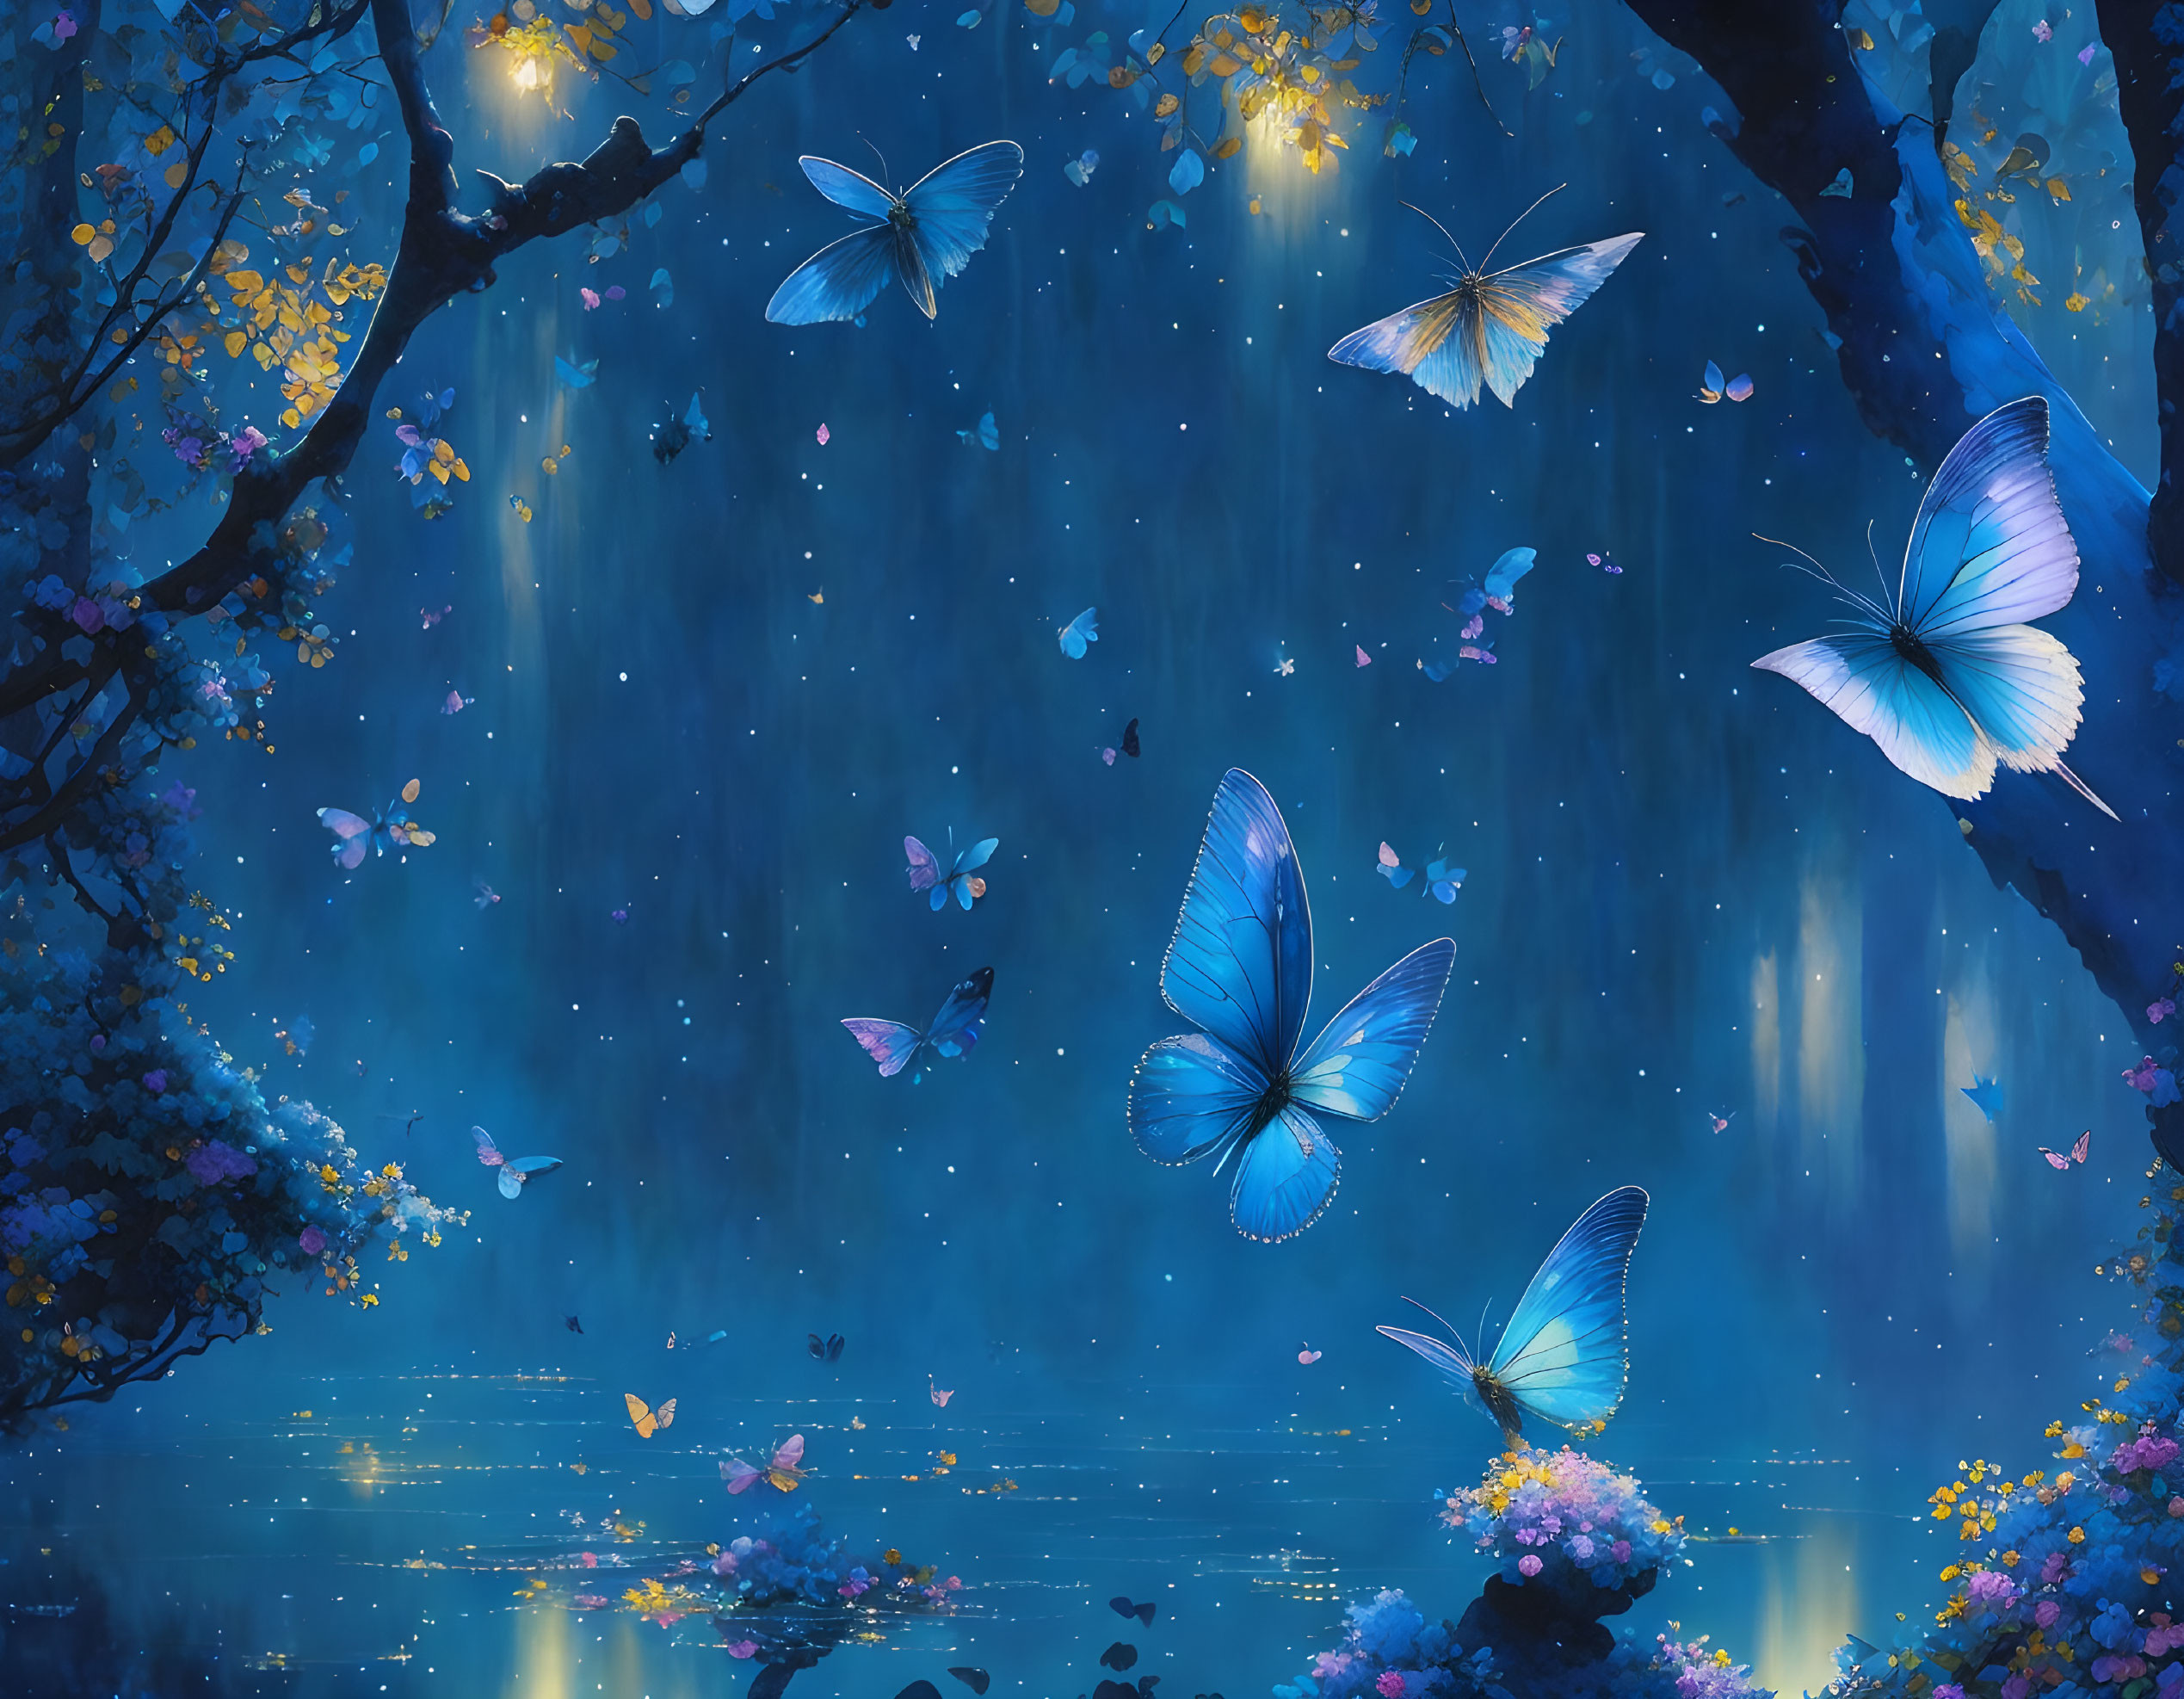 Enchanted Night: Blue Butterflies and Blooms